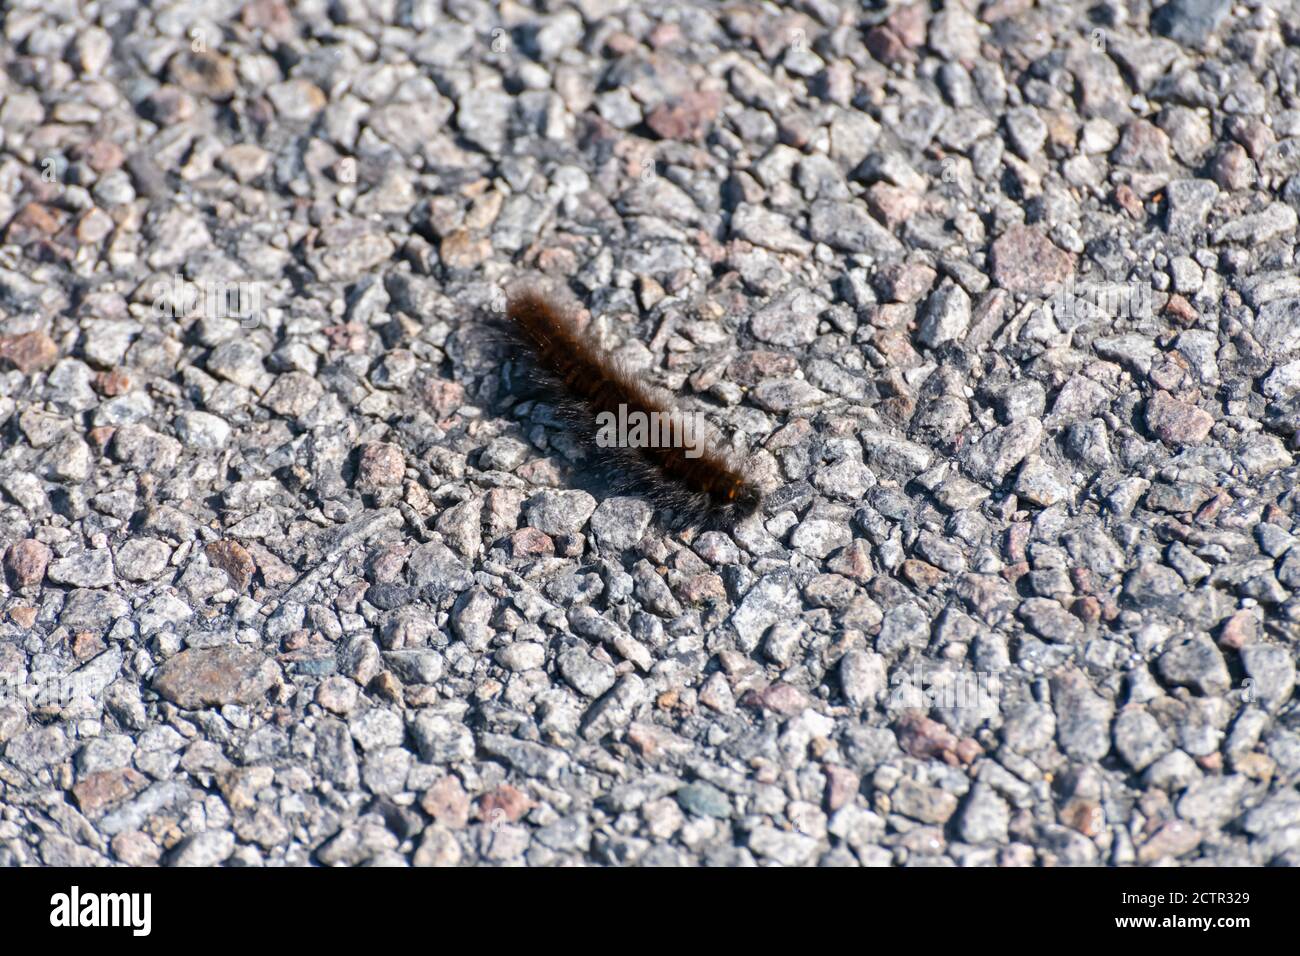 Large Furry Caterpillar on a footpath Stock Photo